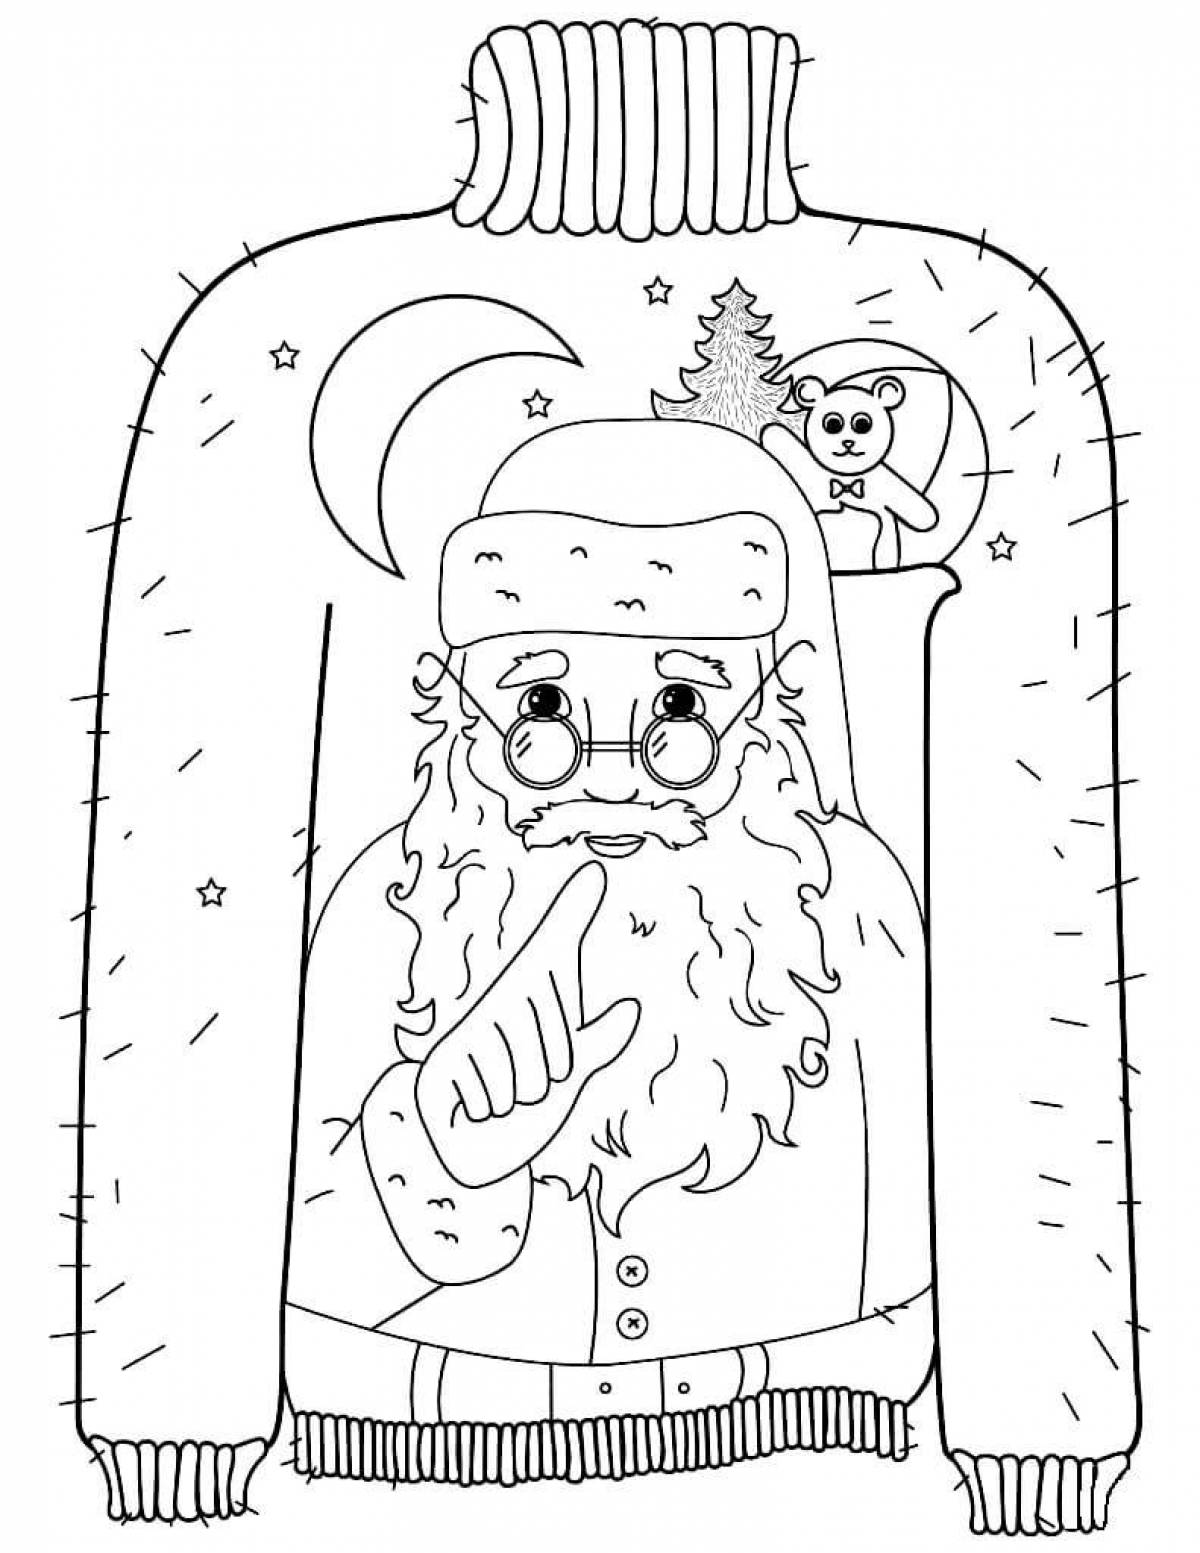 Adorable sweater coloring page